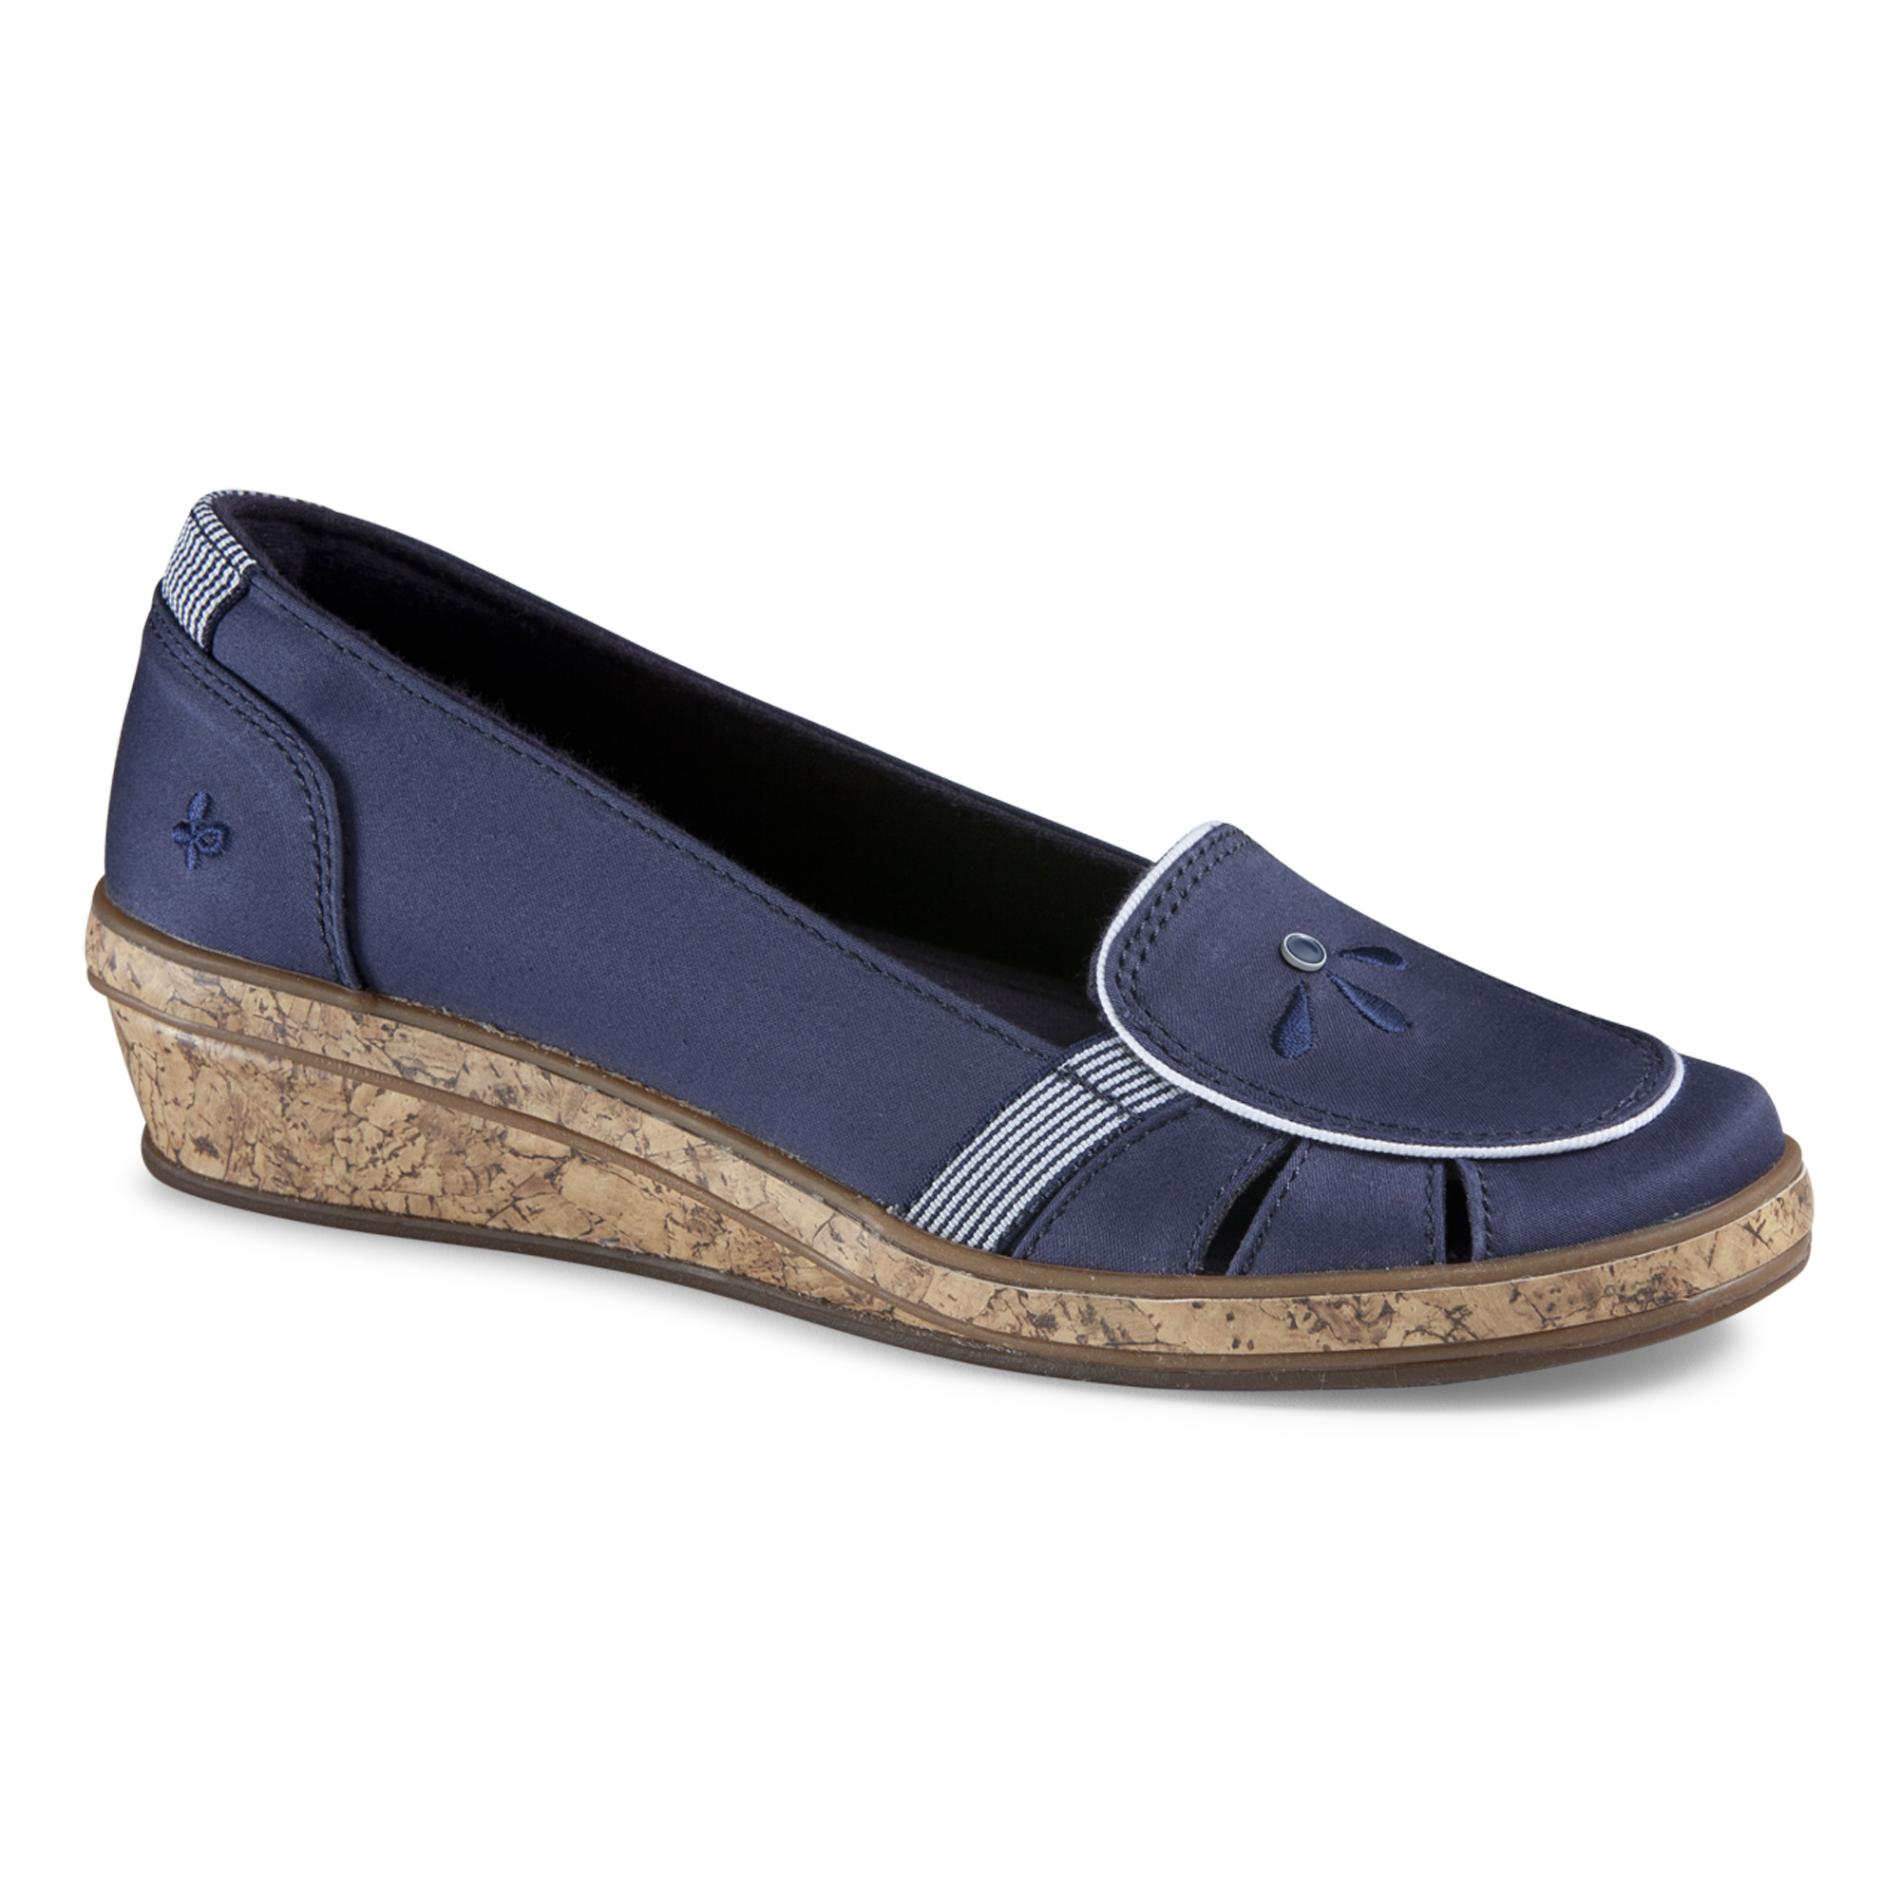 Grasshoppers Women's Geri Navy Wedge Shoe - Wide Width Available